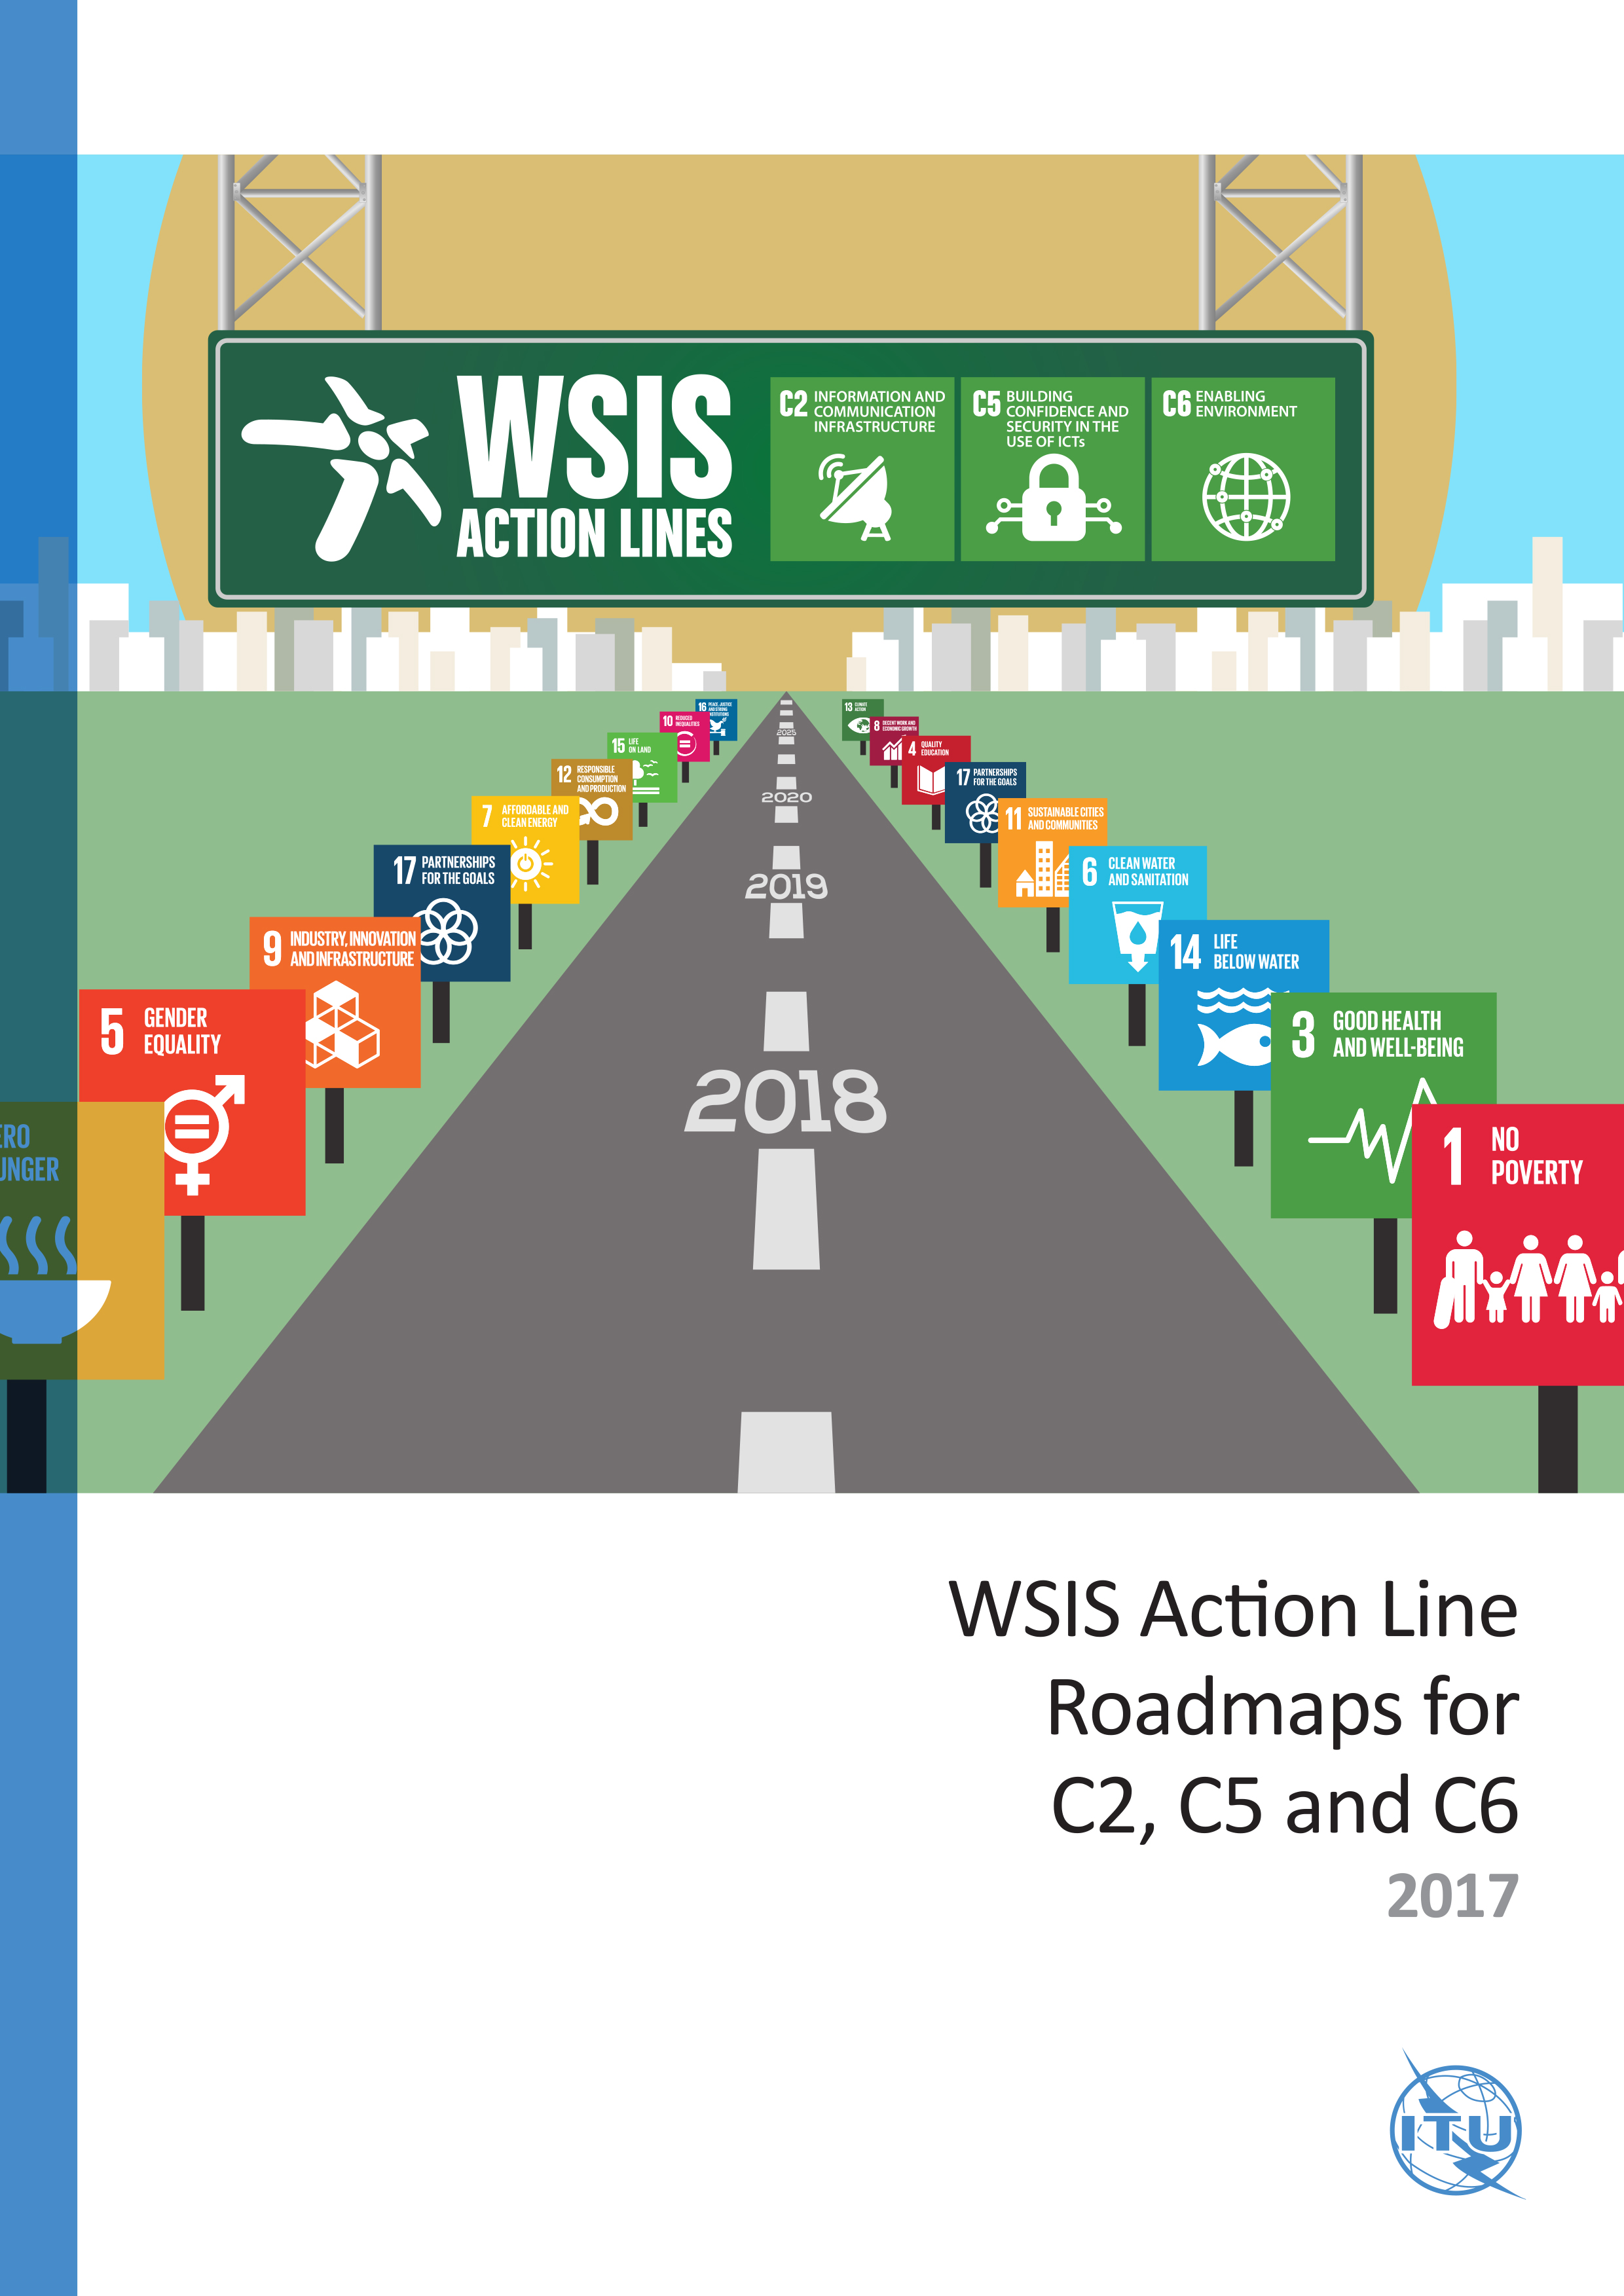 Update of WSIS Action Line Roadmaps (2017)